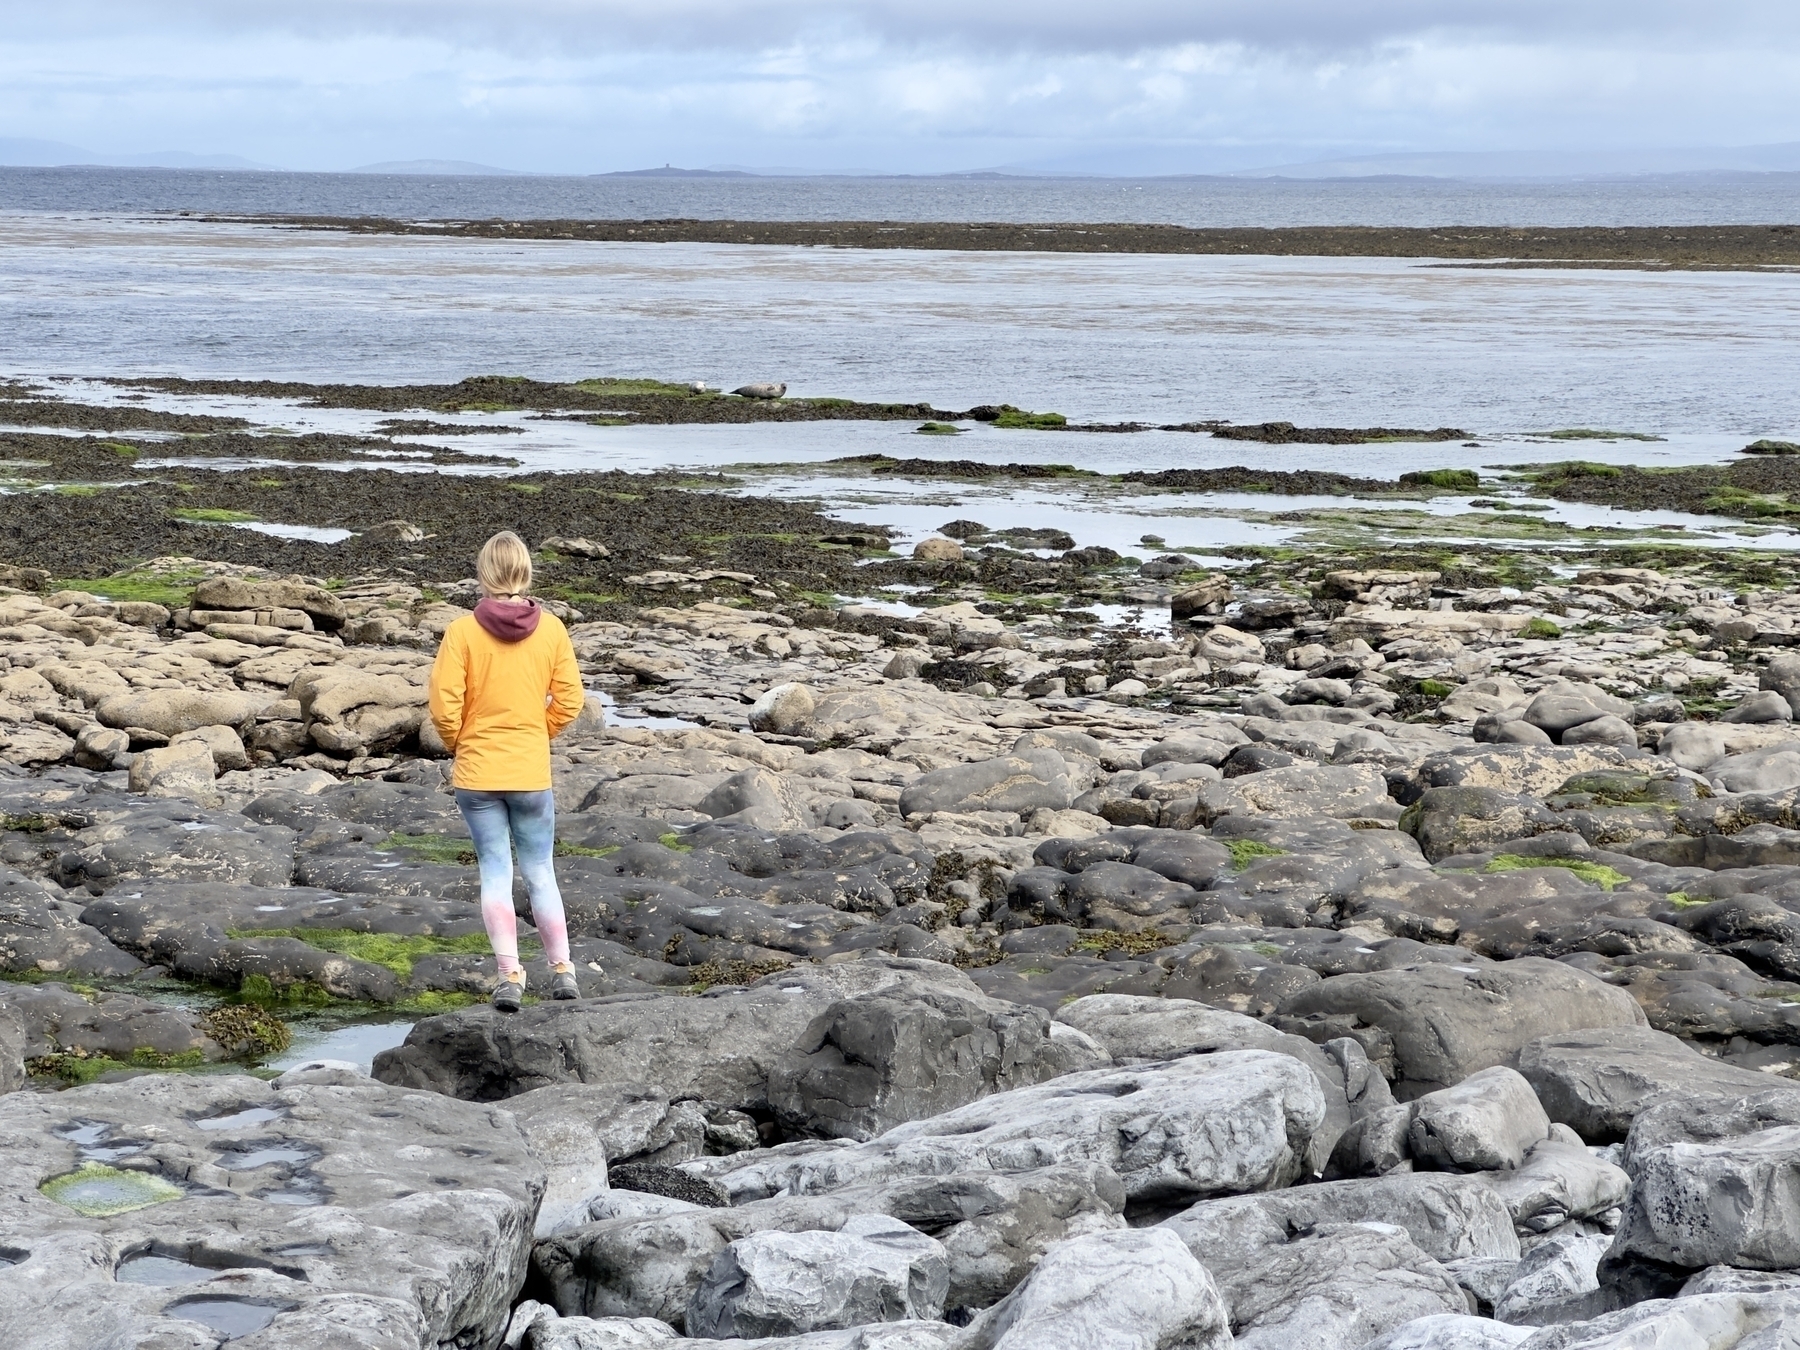 Auto-generated description: A person in a yellow jacket stands on a rocky shoreline, looking out at the expansive sea under a cloudy sky.